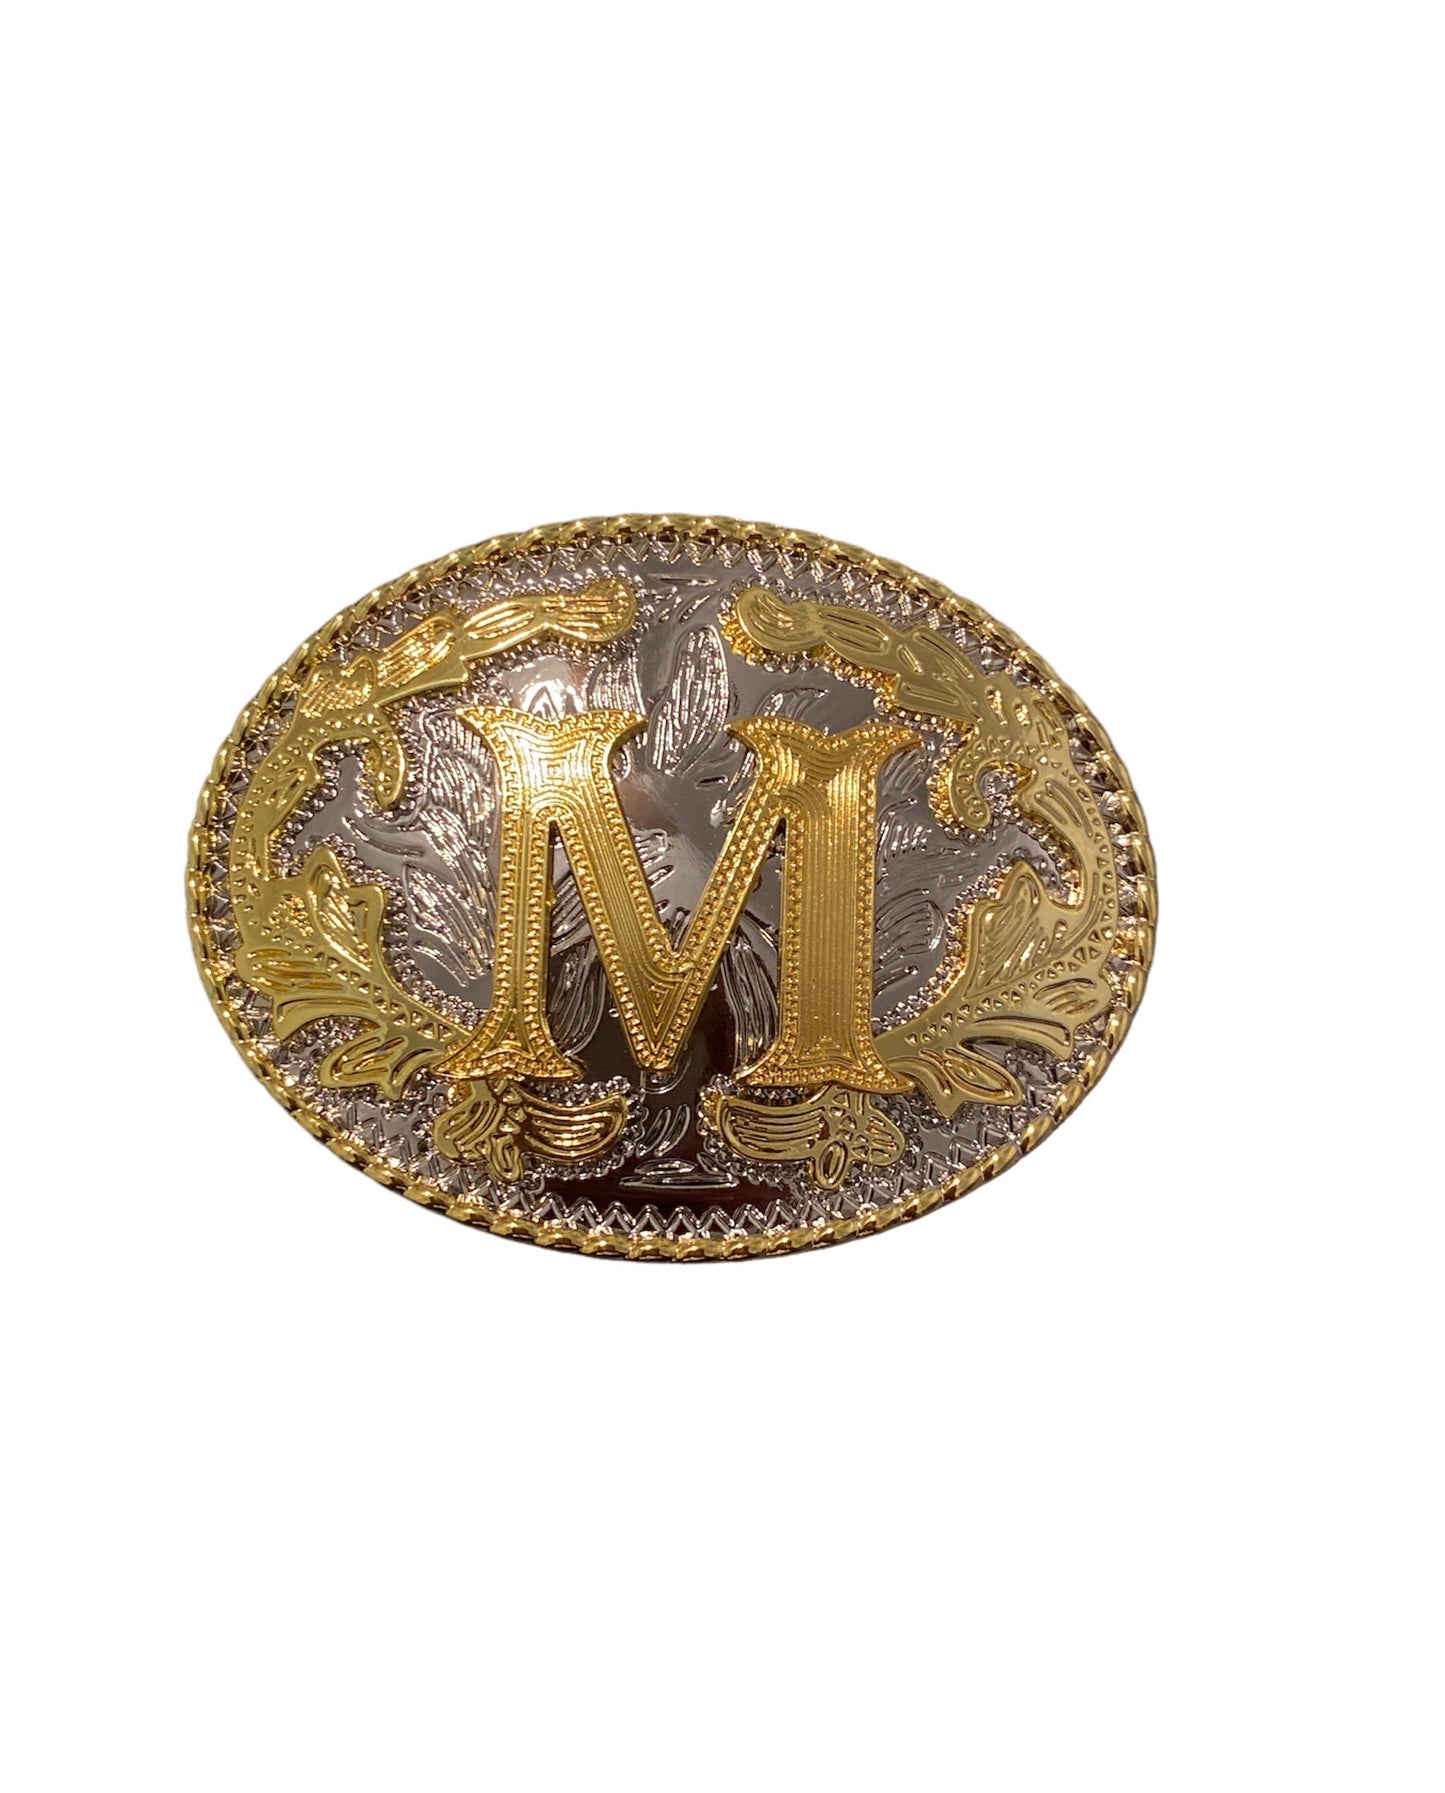 Initial Letter "M" Cowboy Rodeo Western Large Gold Tone Belt Buckle